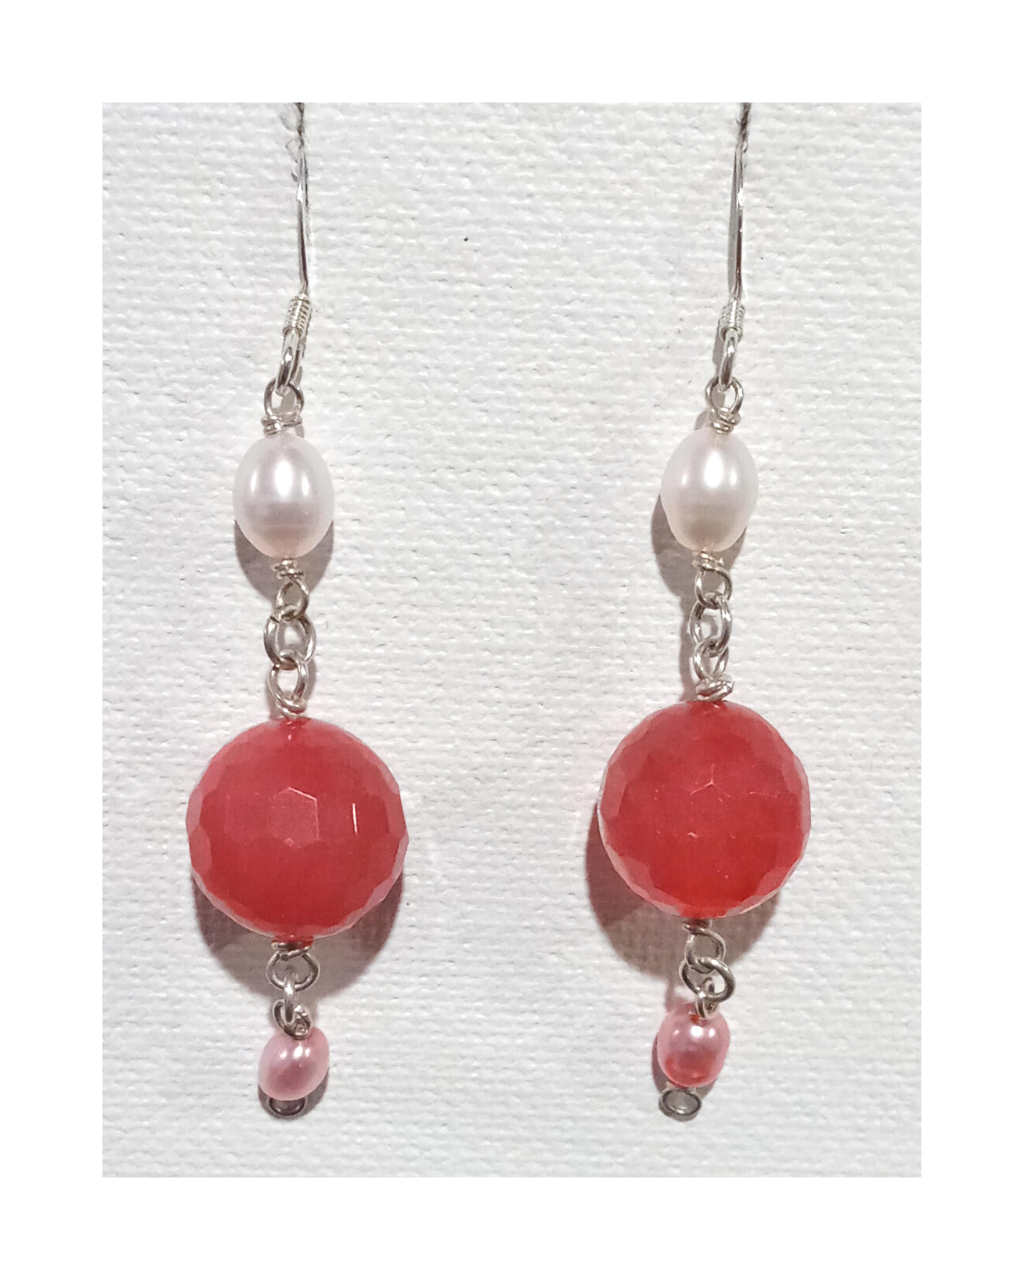 White and Pink Pearls with Large Faceted Dyed Pink Jade Drop Sterling Silver Earrings 2 5/8"